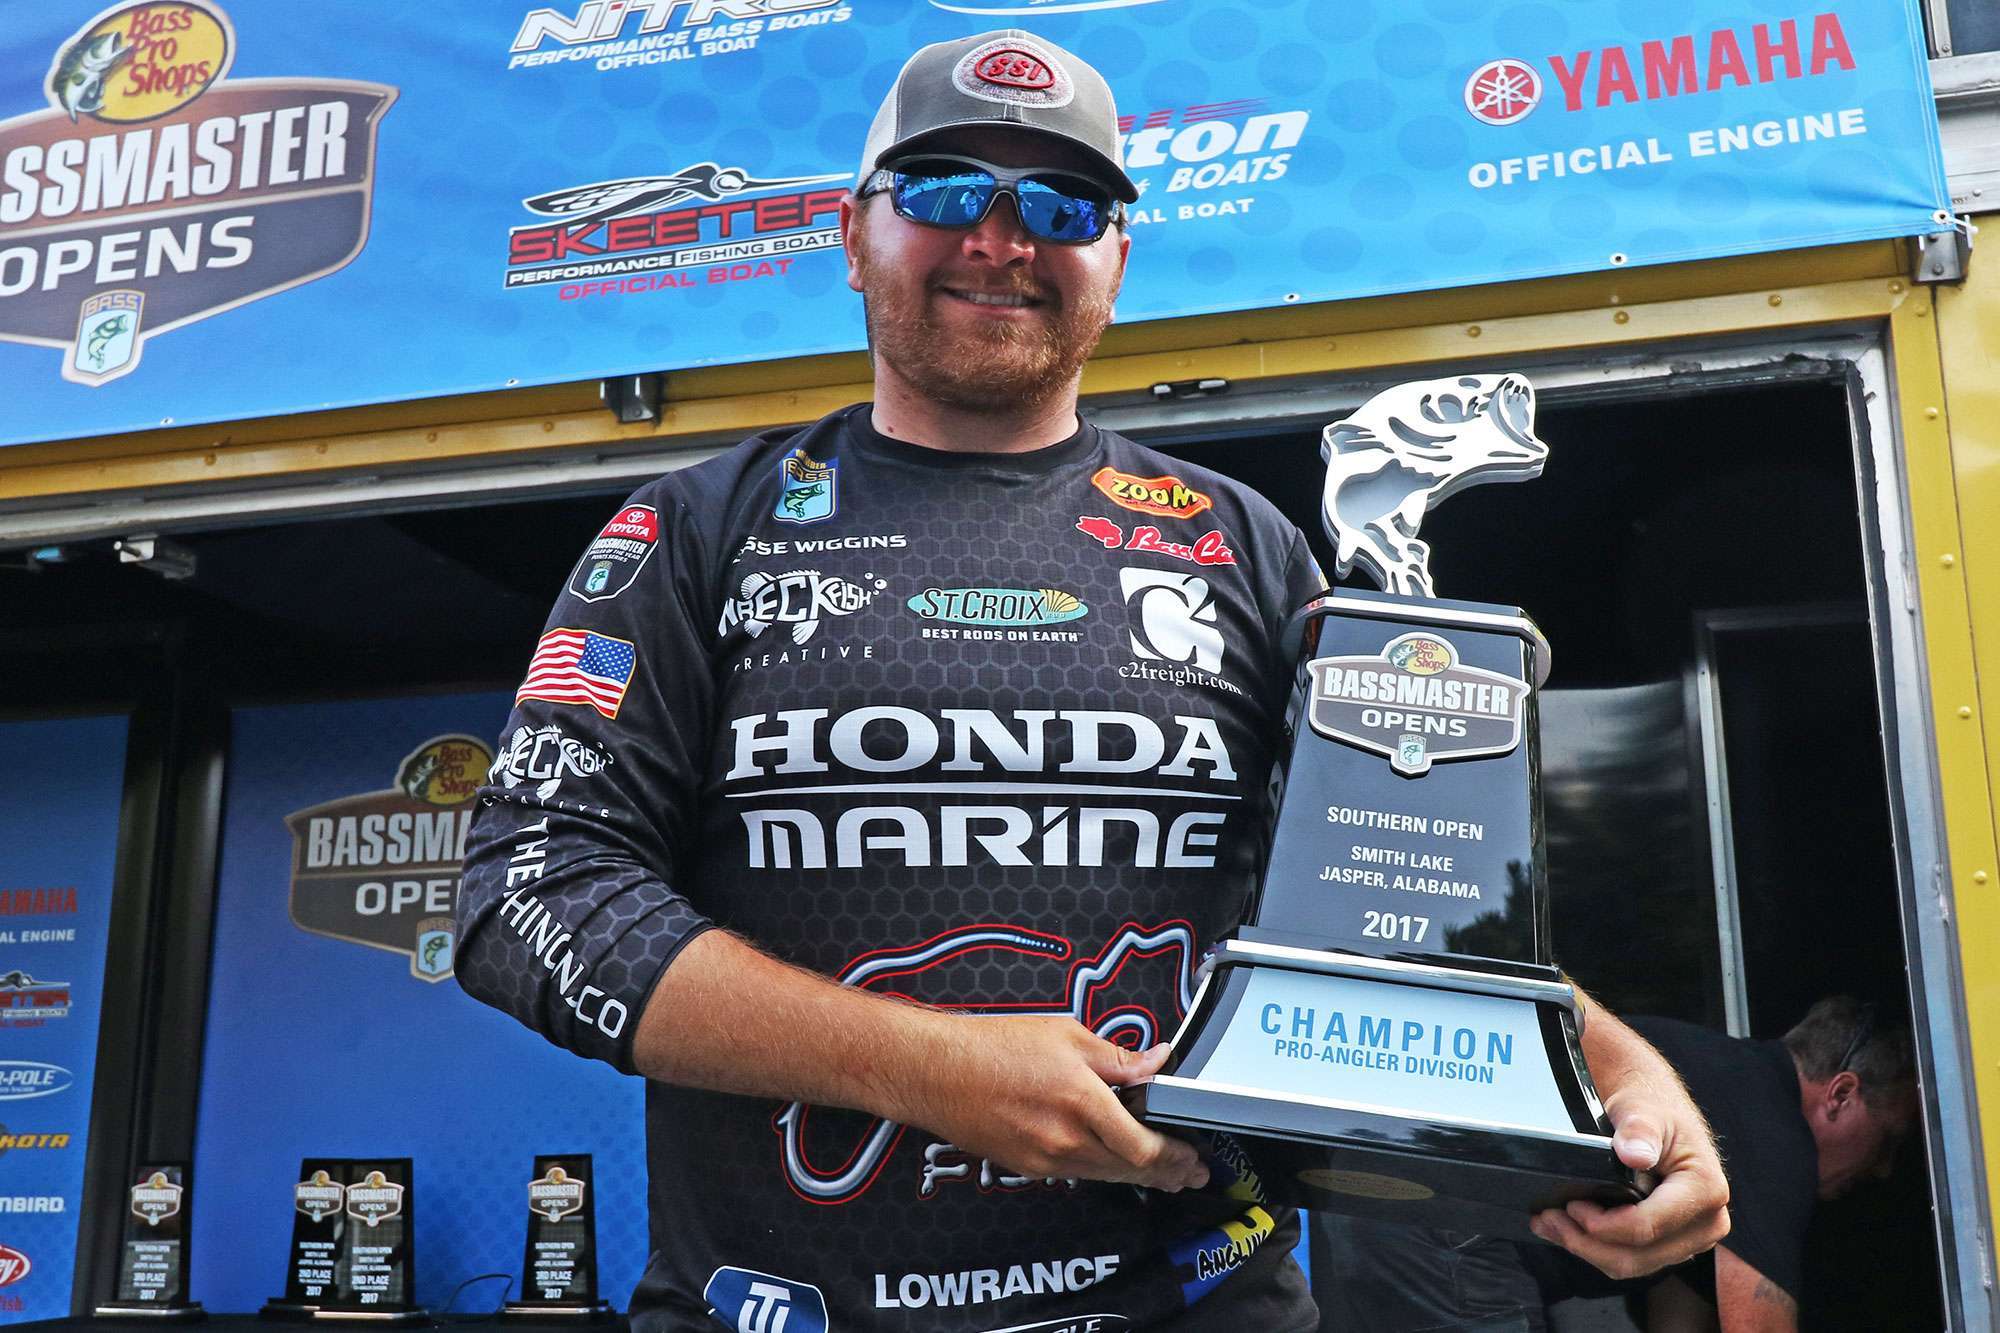 Jesse Wiggins was also the winner when the Bassmaster Opens landed on Smith Lake in 2017. Wiggins pulled together a three-day weight of 39-15 to win â¦ 5 pounds more than the second-place finisher.
